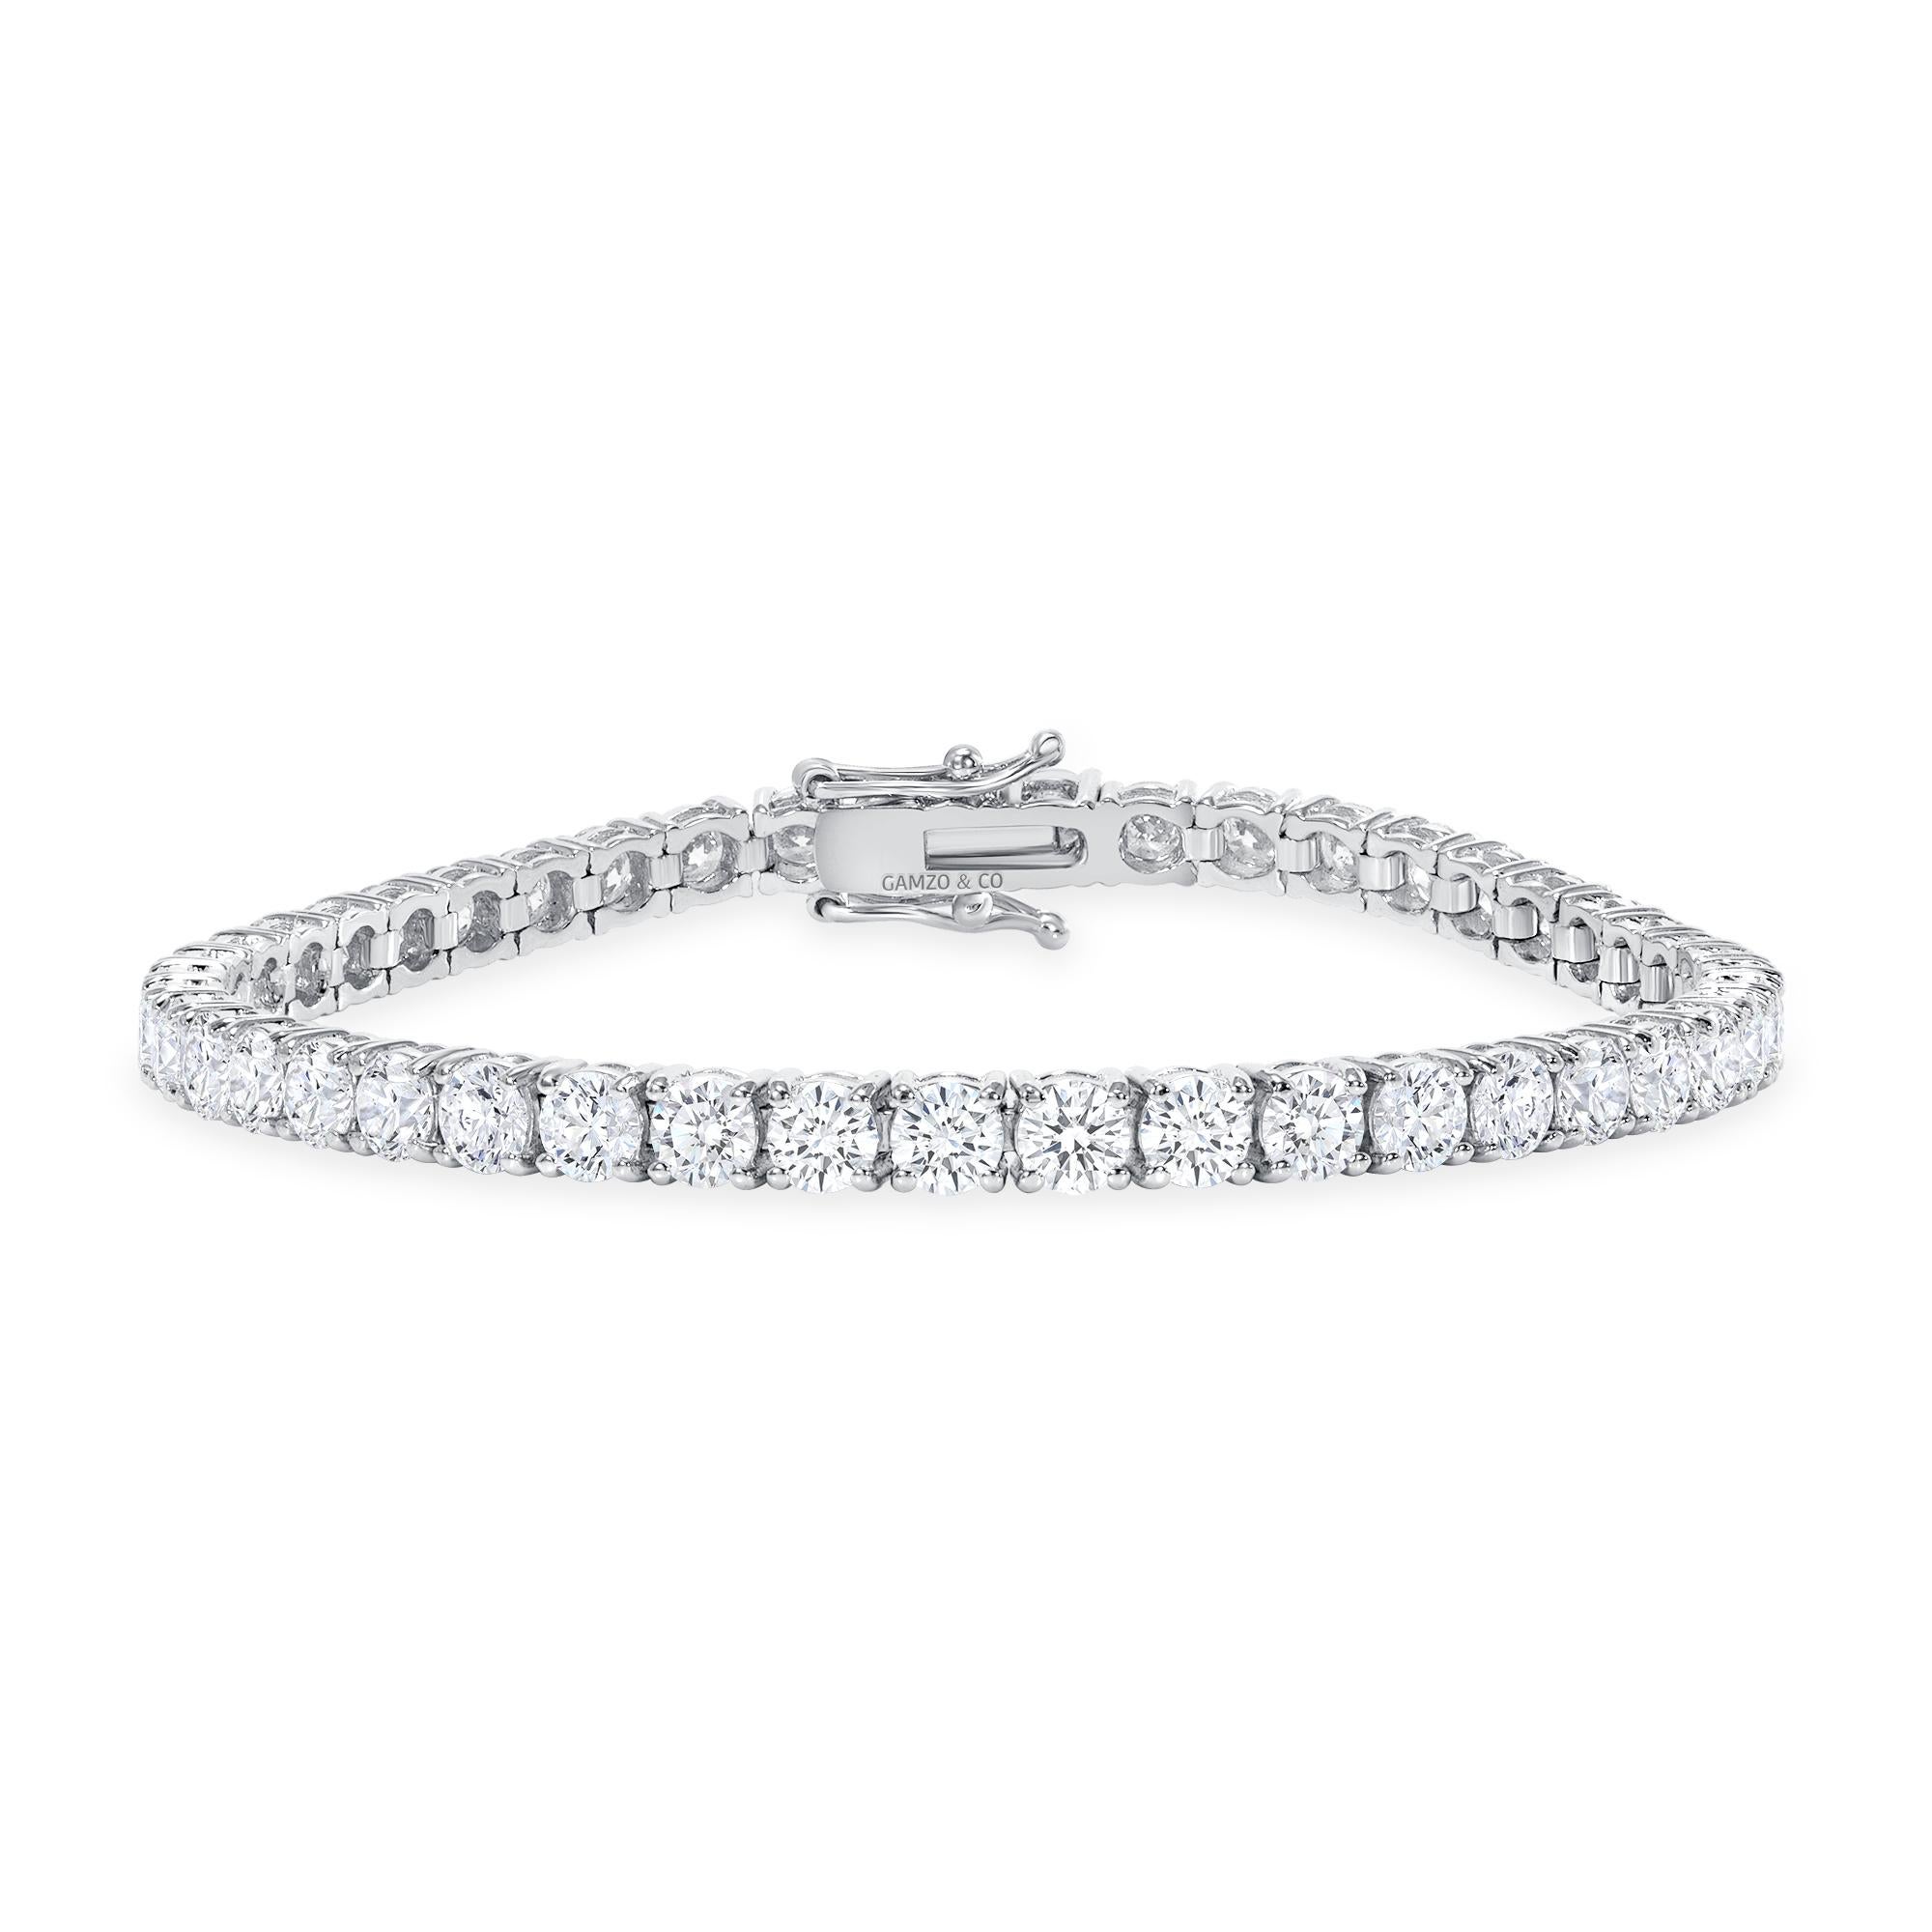 This diamond tennis bracelet features beautifully cut round diamonds set gorgeously in 14k gold.

Metal: 14k Gold
Diamond Cut: Round Natural Diamond 
Total Diamond Carats: 5ct
Diamond Clarity: VS
Diamond Color: F-G
Color: White Gold
Bracelet Length: